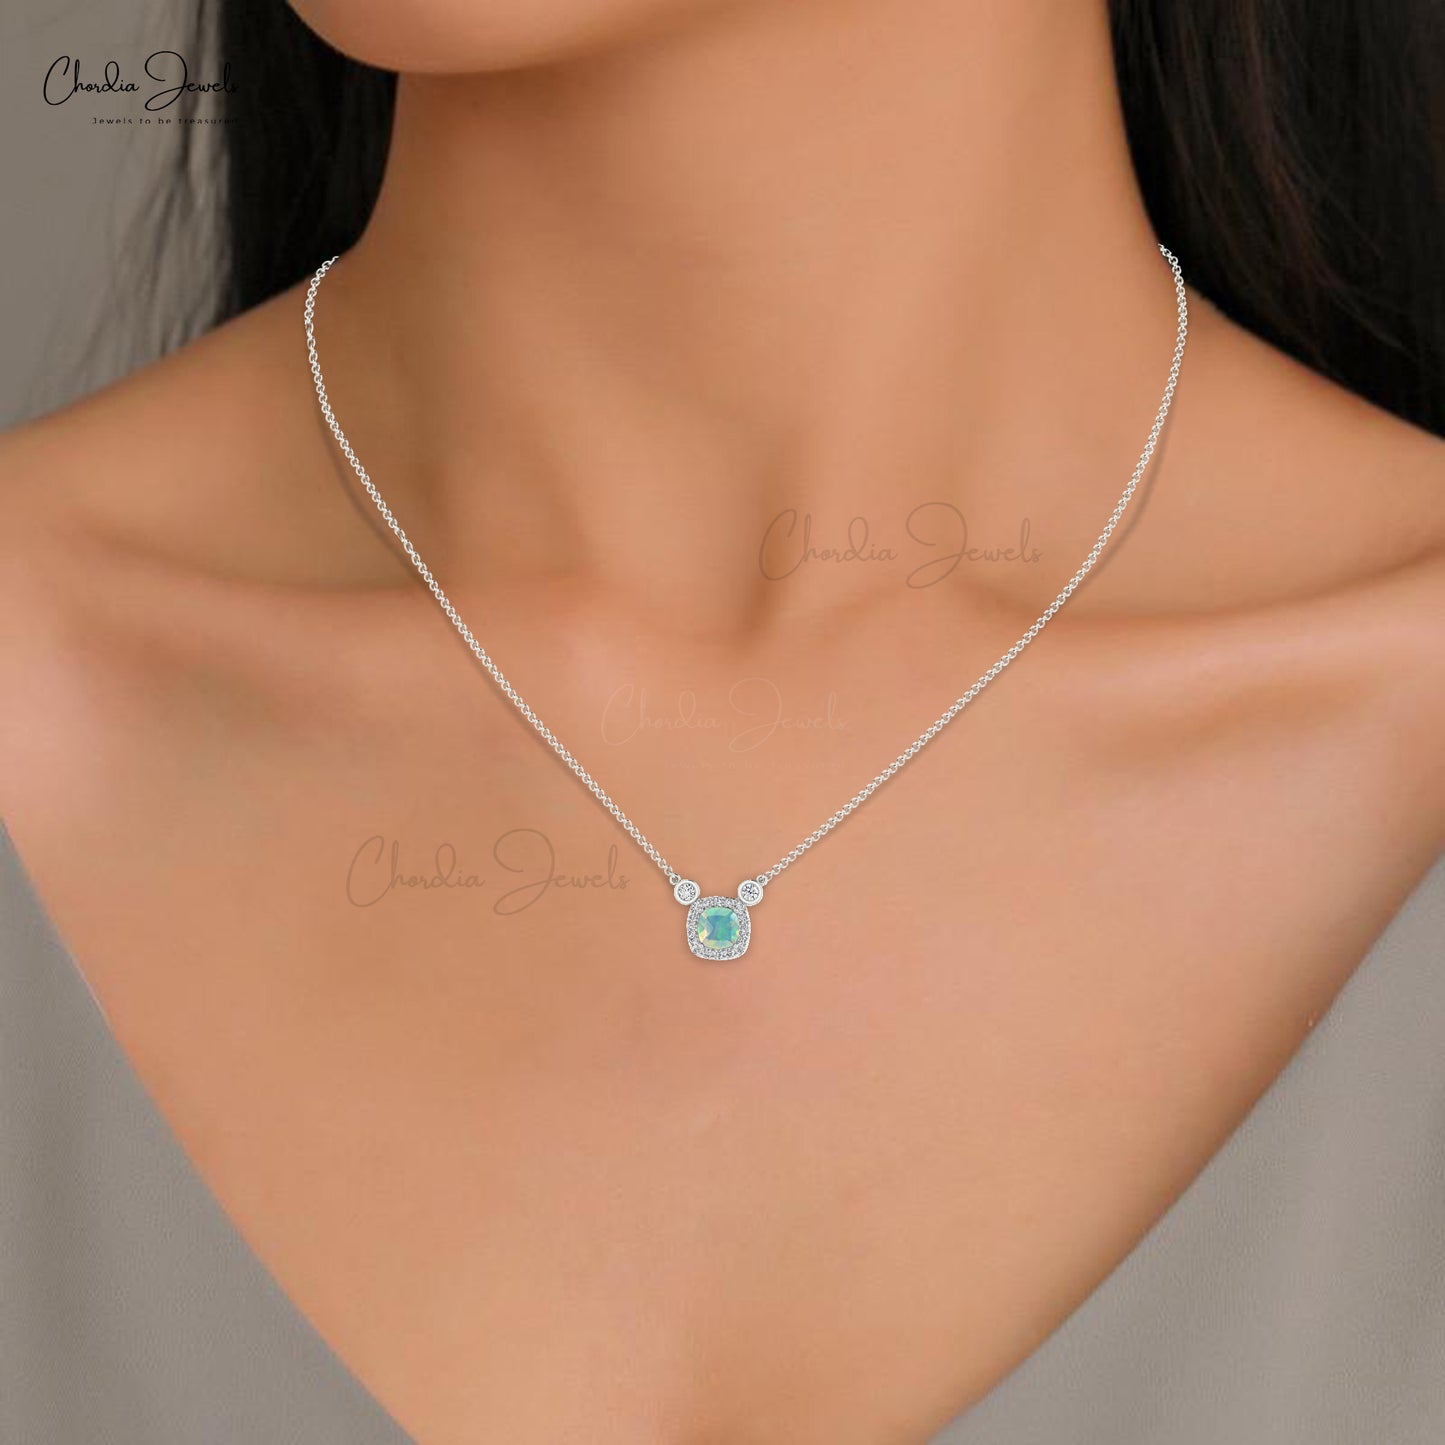 14k Solid Gold Diamond Halo Necklace Natural Ethiopian Opal Handmade Necklace 4mm Cushion Cut Gemstone Handmade Necklace For Women's